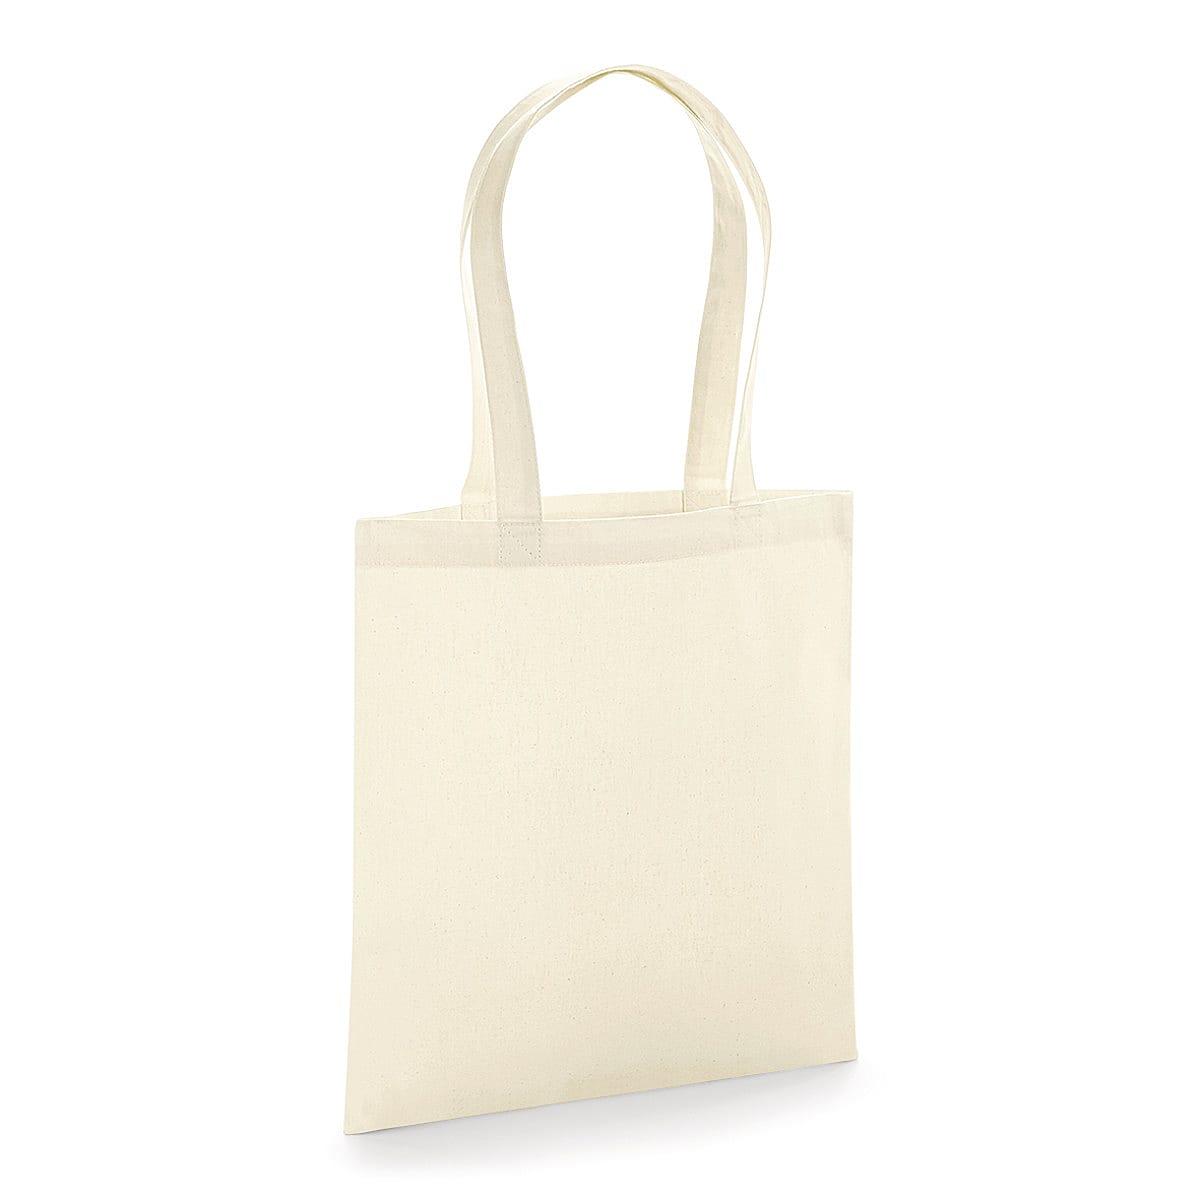 Westford Mill Organic Premium Cotton Tot in Natural (Product Code: W261)